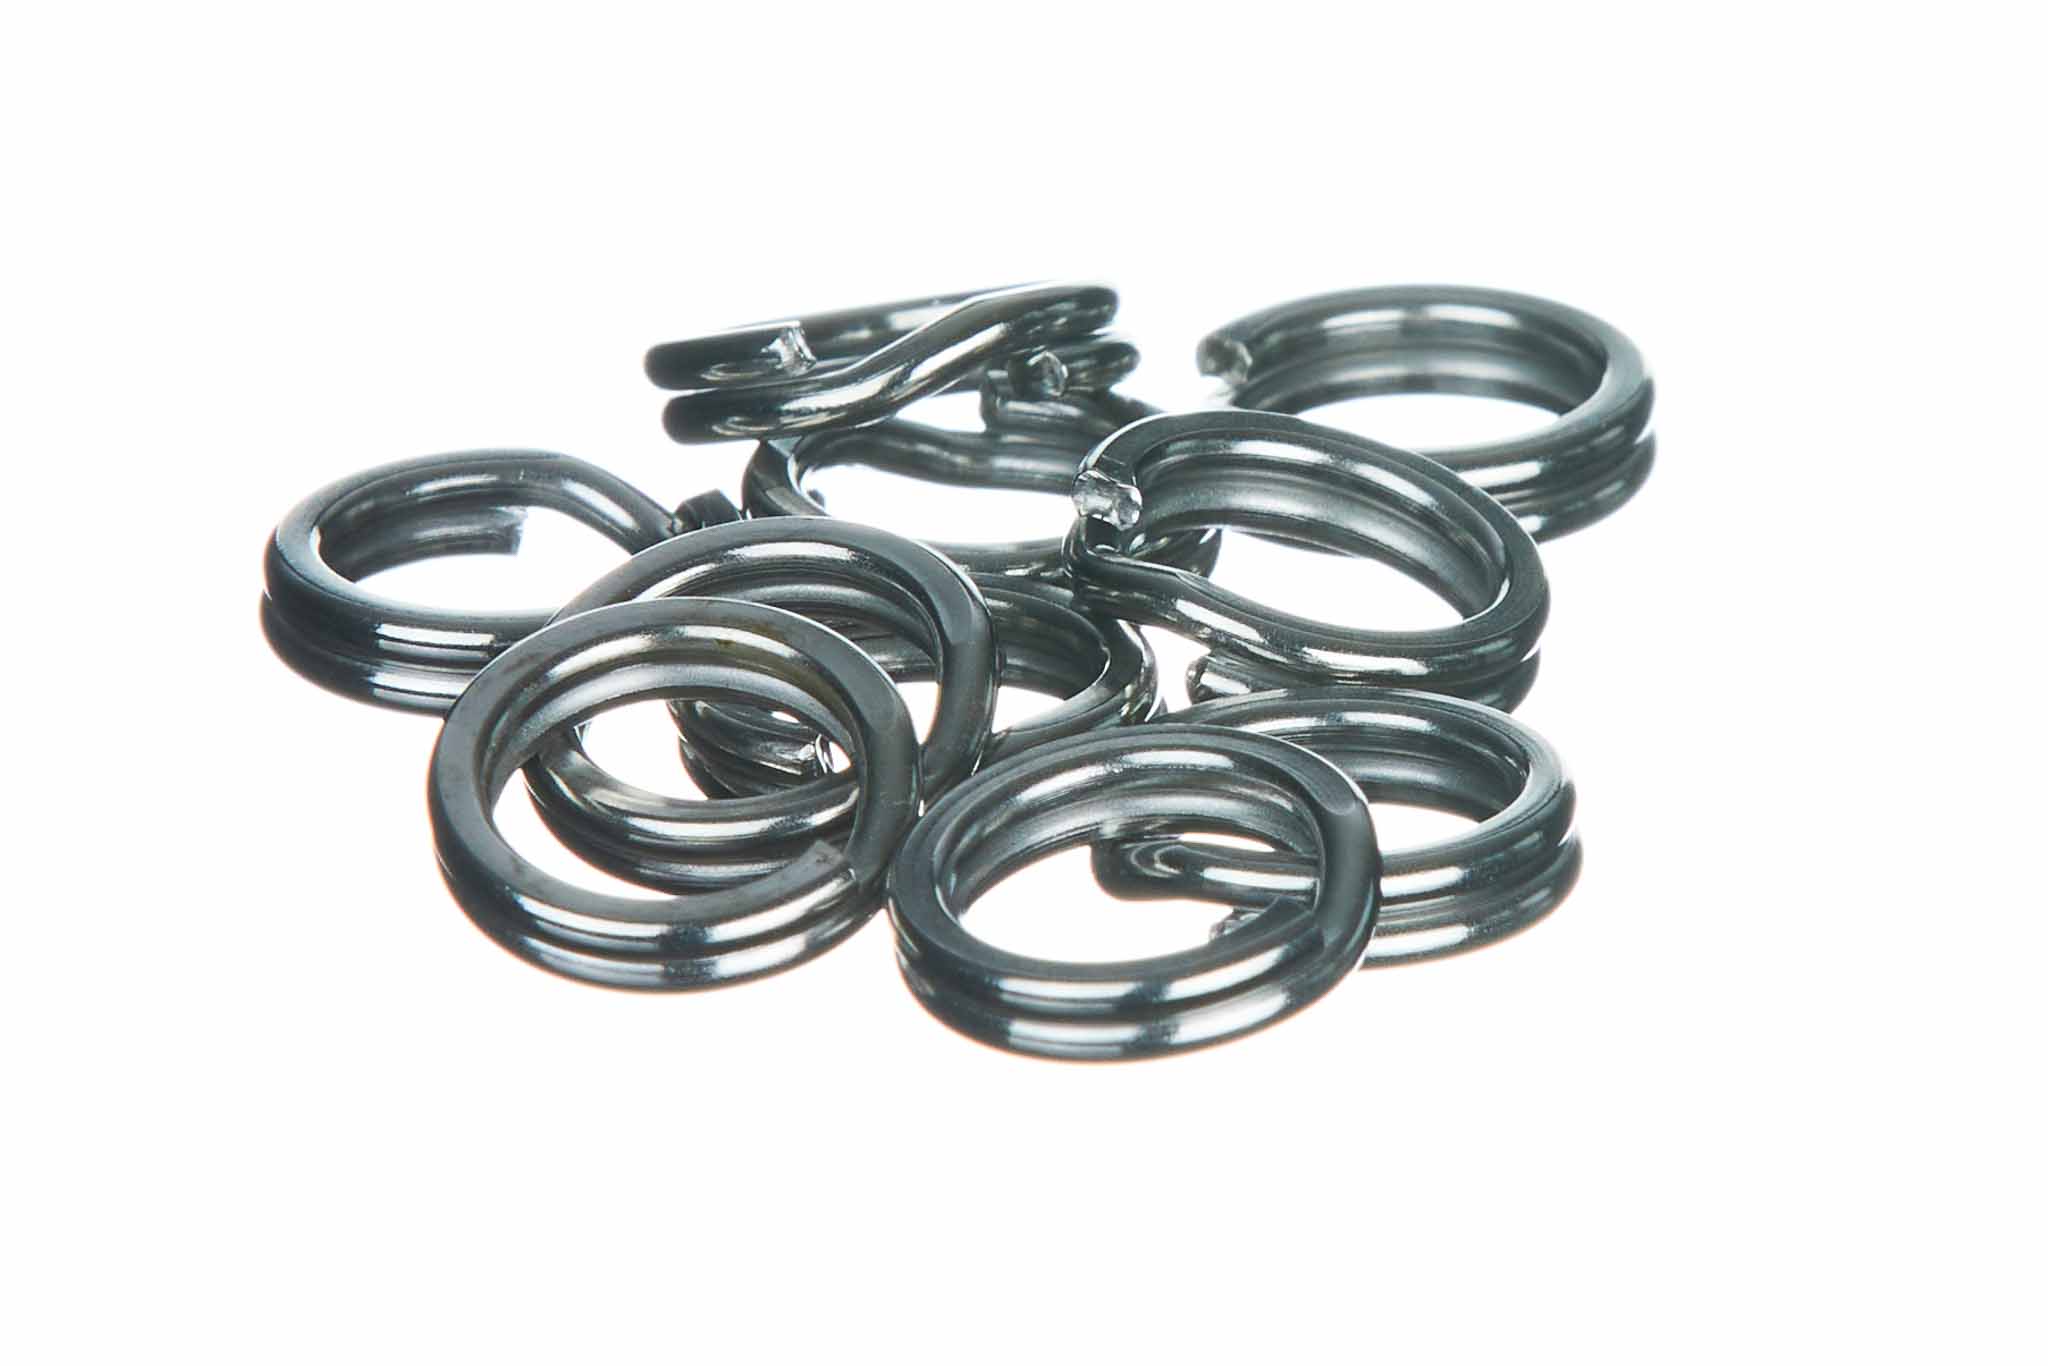 Split Rings - Fish Pig Tackle  Top quality fishing tackle and apparel